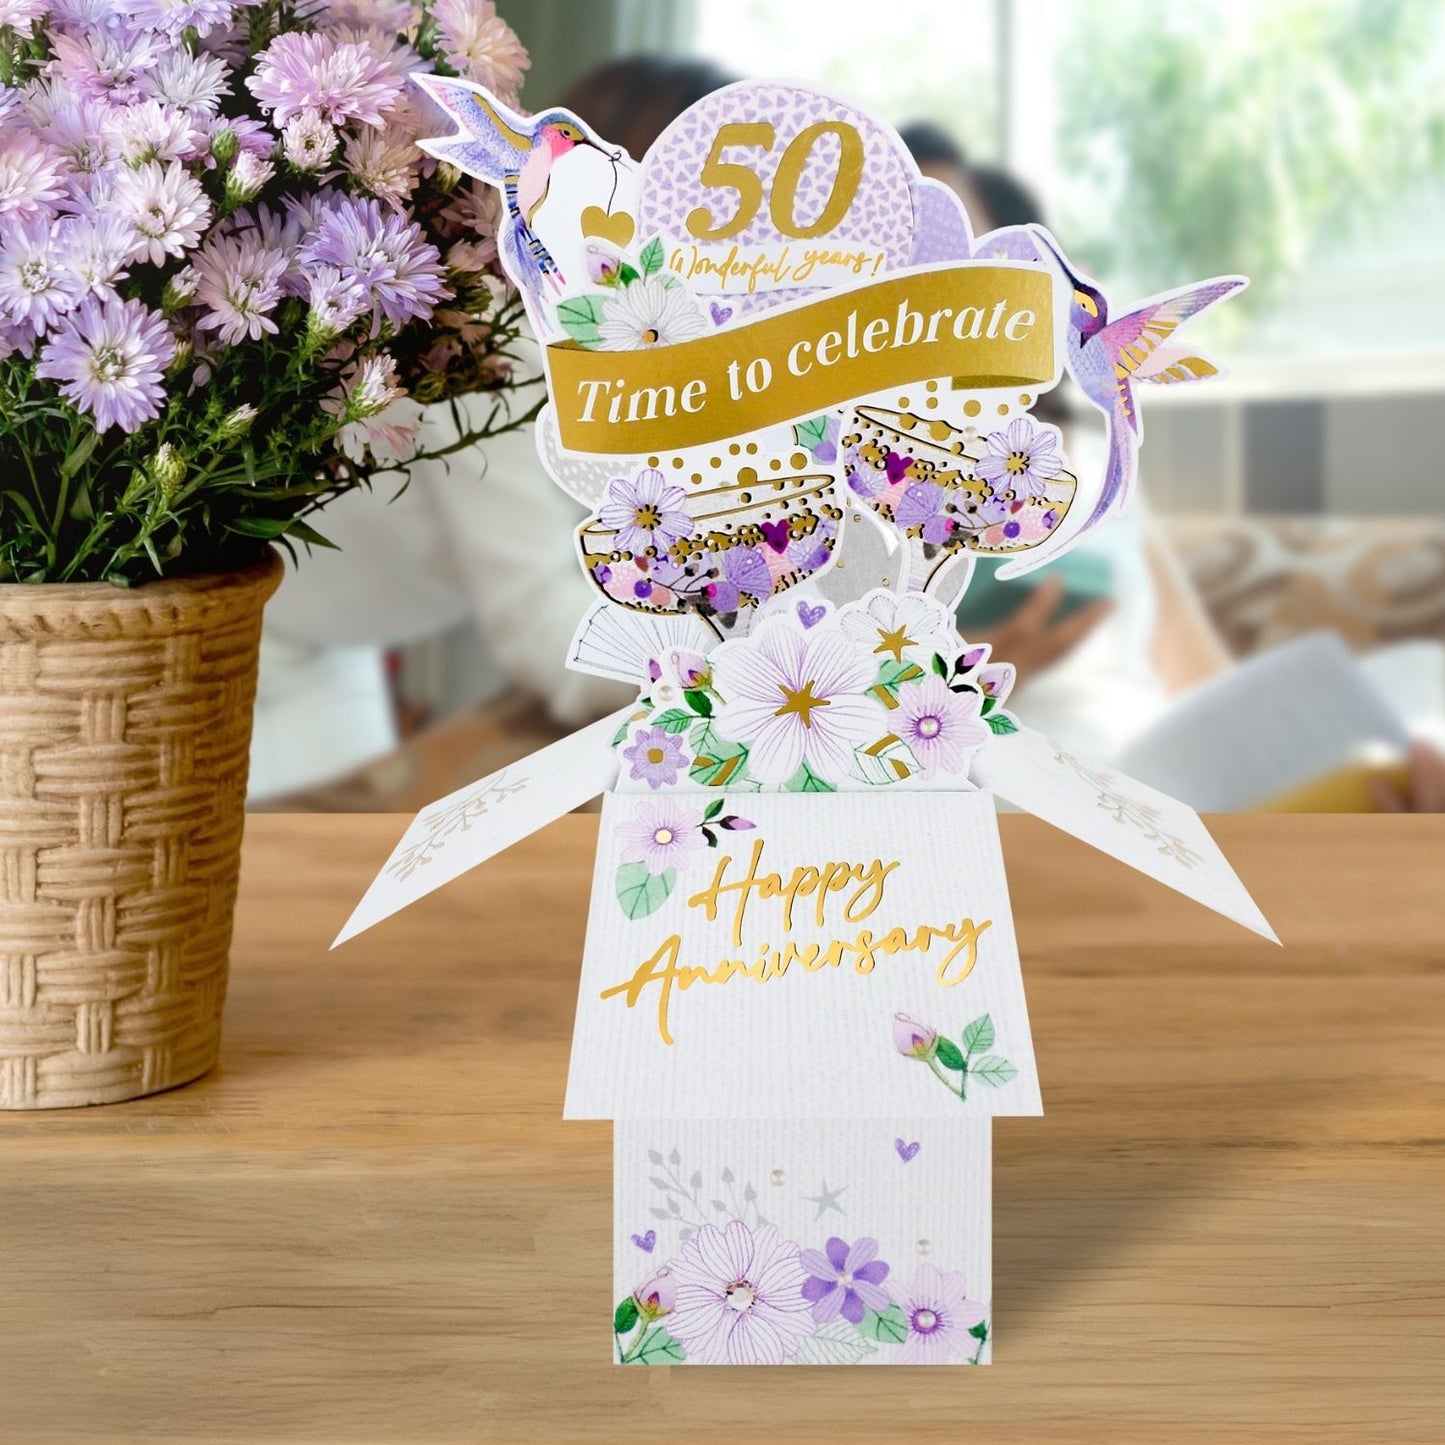 Clever Cube 50 Wonderful Years Golden Cheers! Anniversary Pop Up Greeting Card